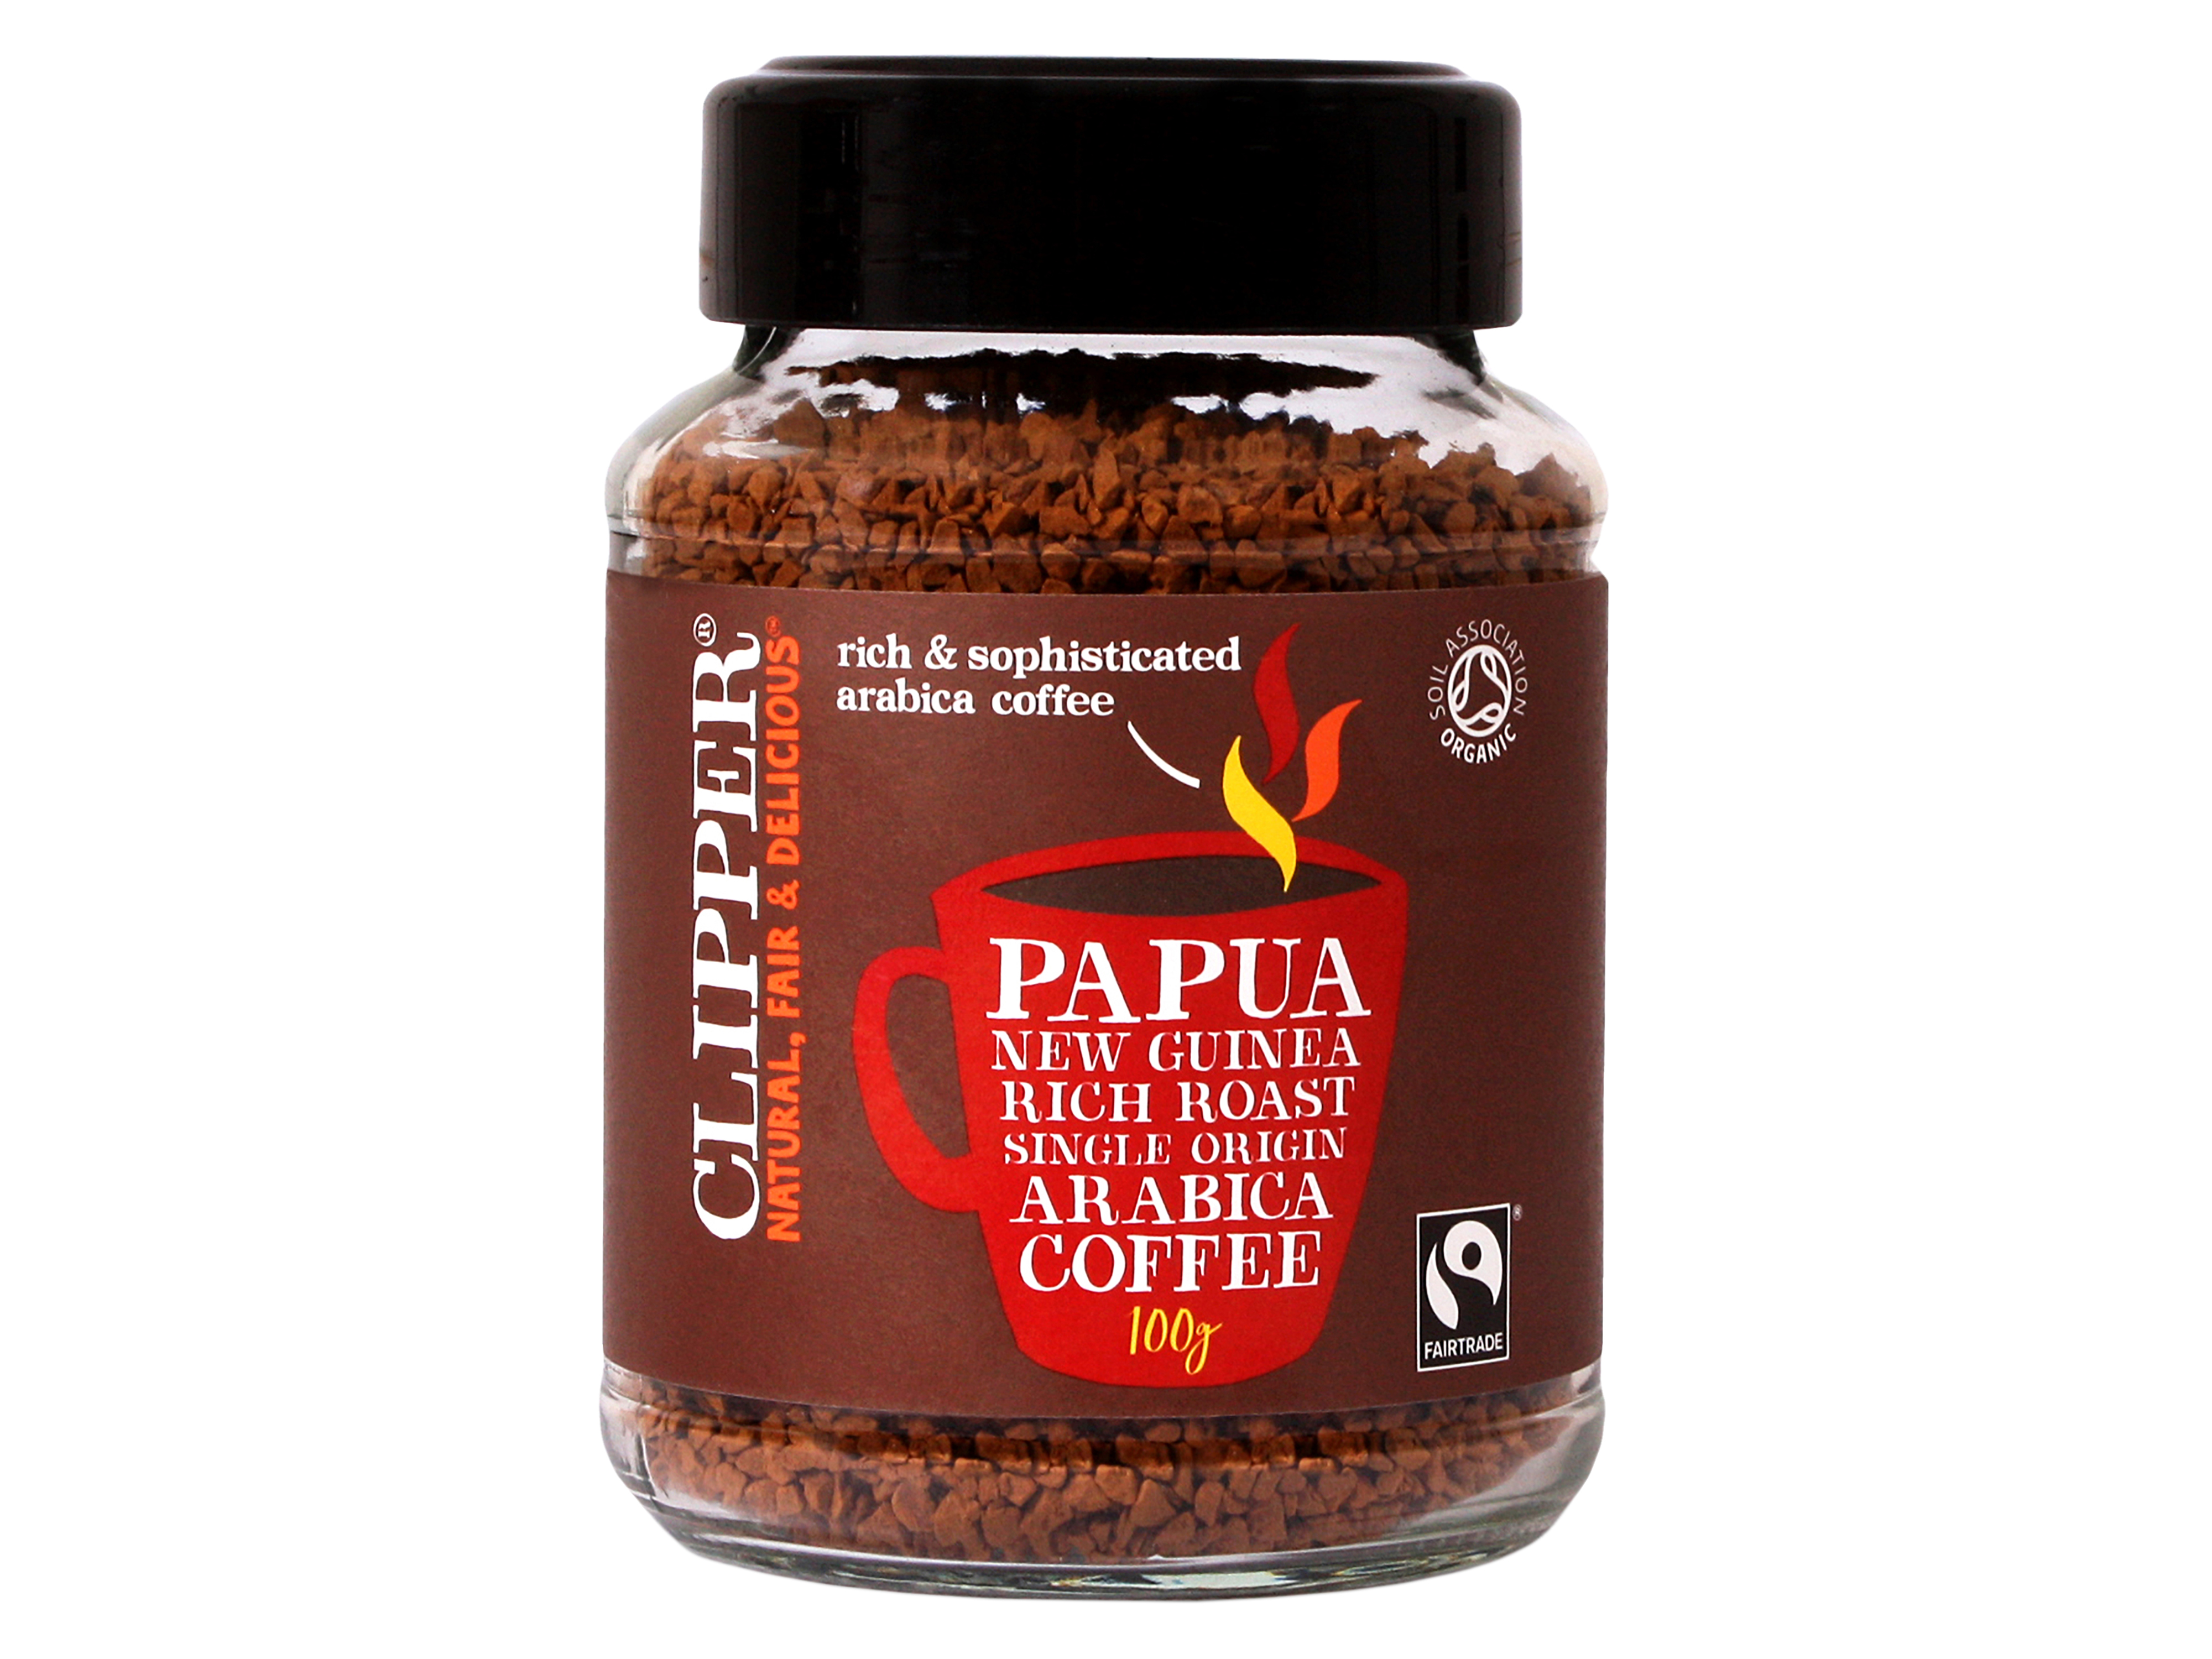 Clipper Instant Coffee Papau New Guinea FT, 100 g økologisk